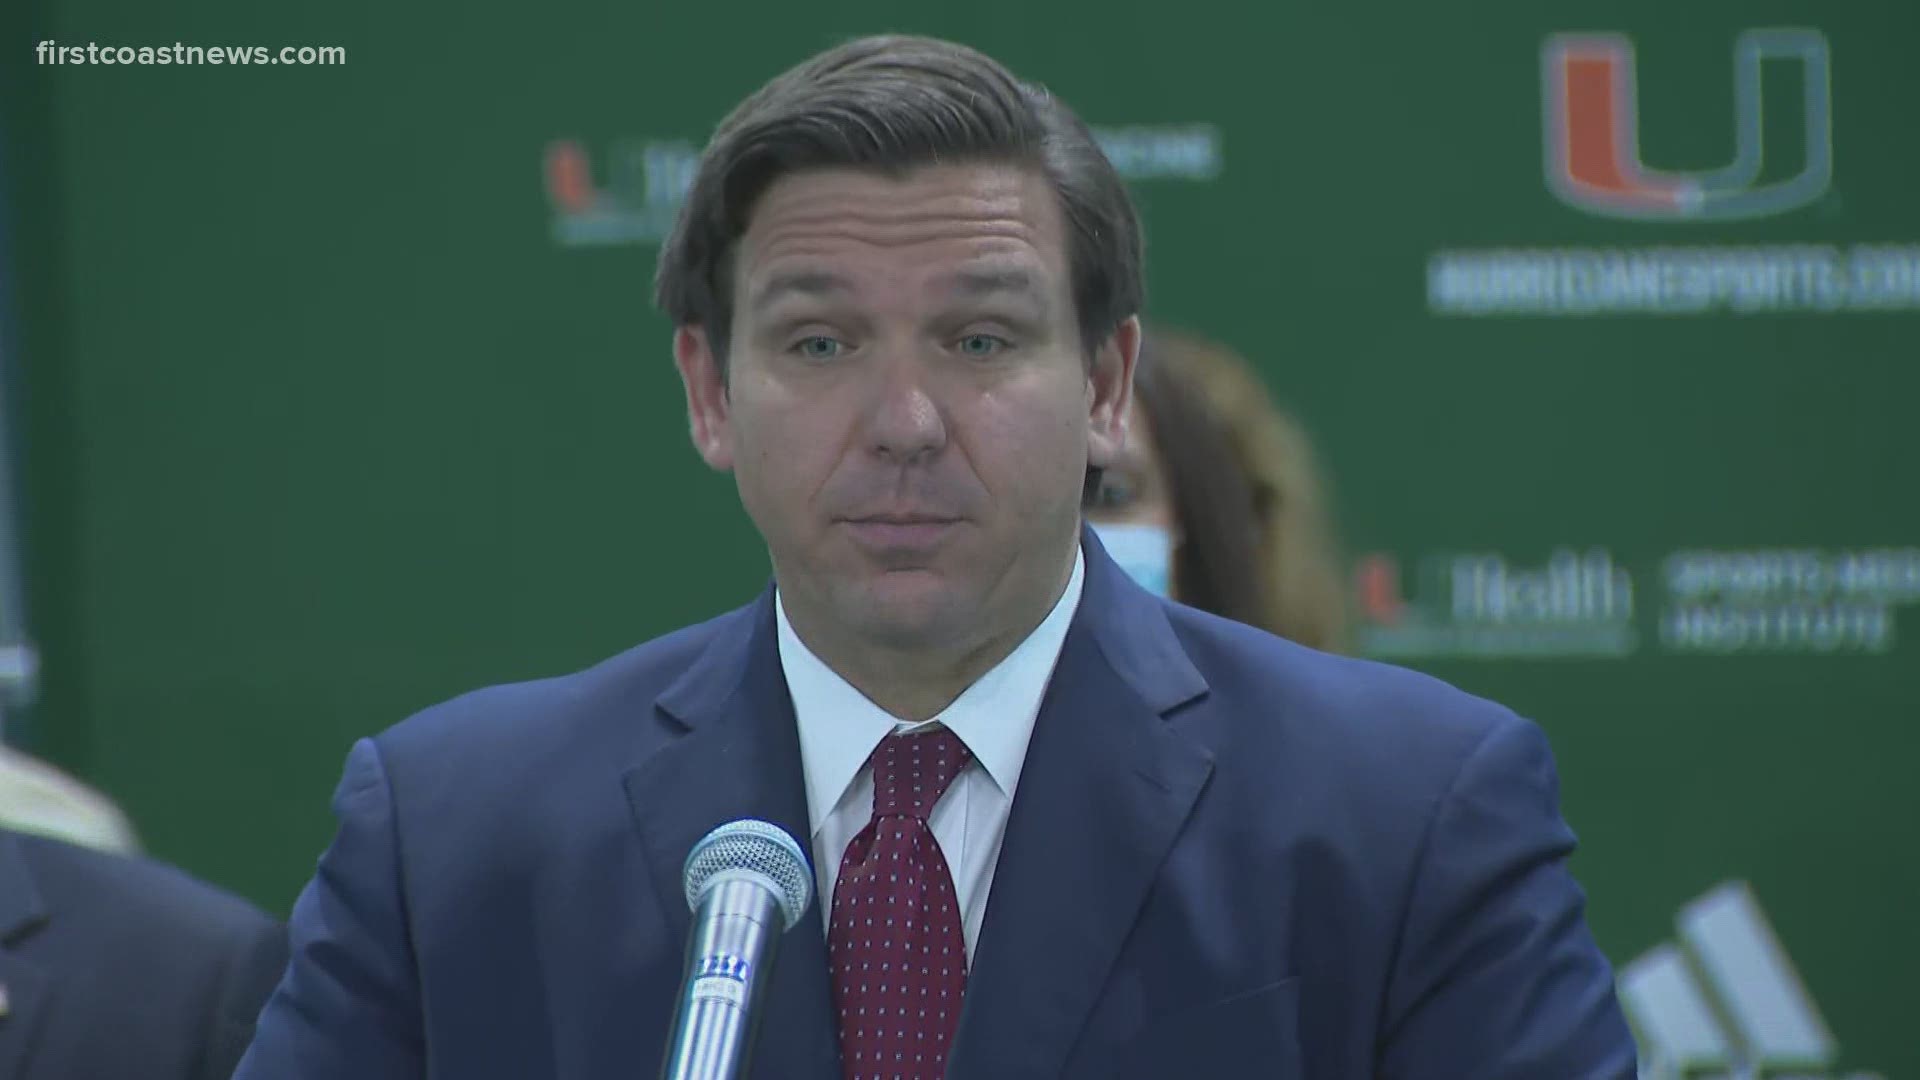 The announcement will take place at noon at the University of Miami Indoor Practice Facility. DeSantis will be joined by Lieutenant Governor Jeanette Nuñez.